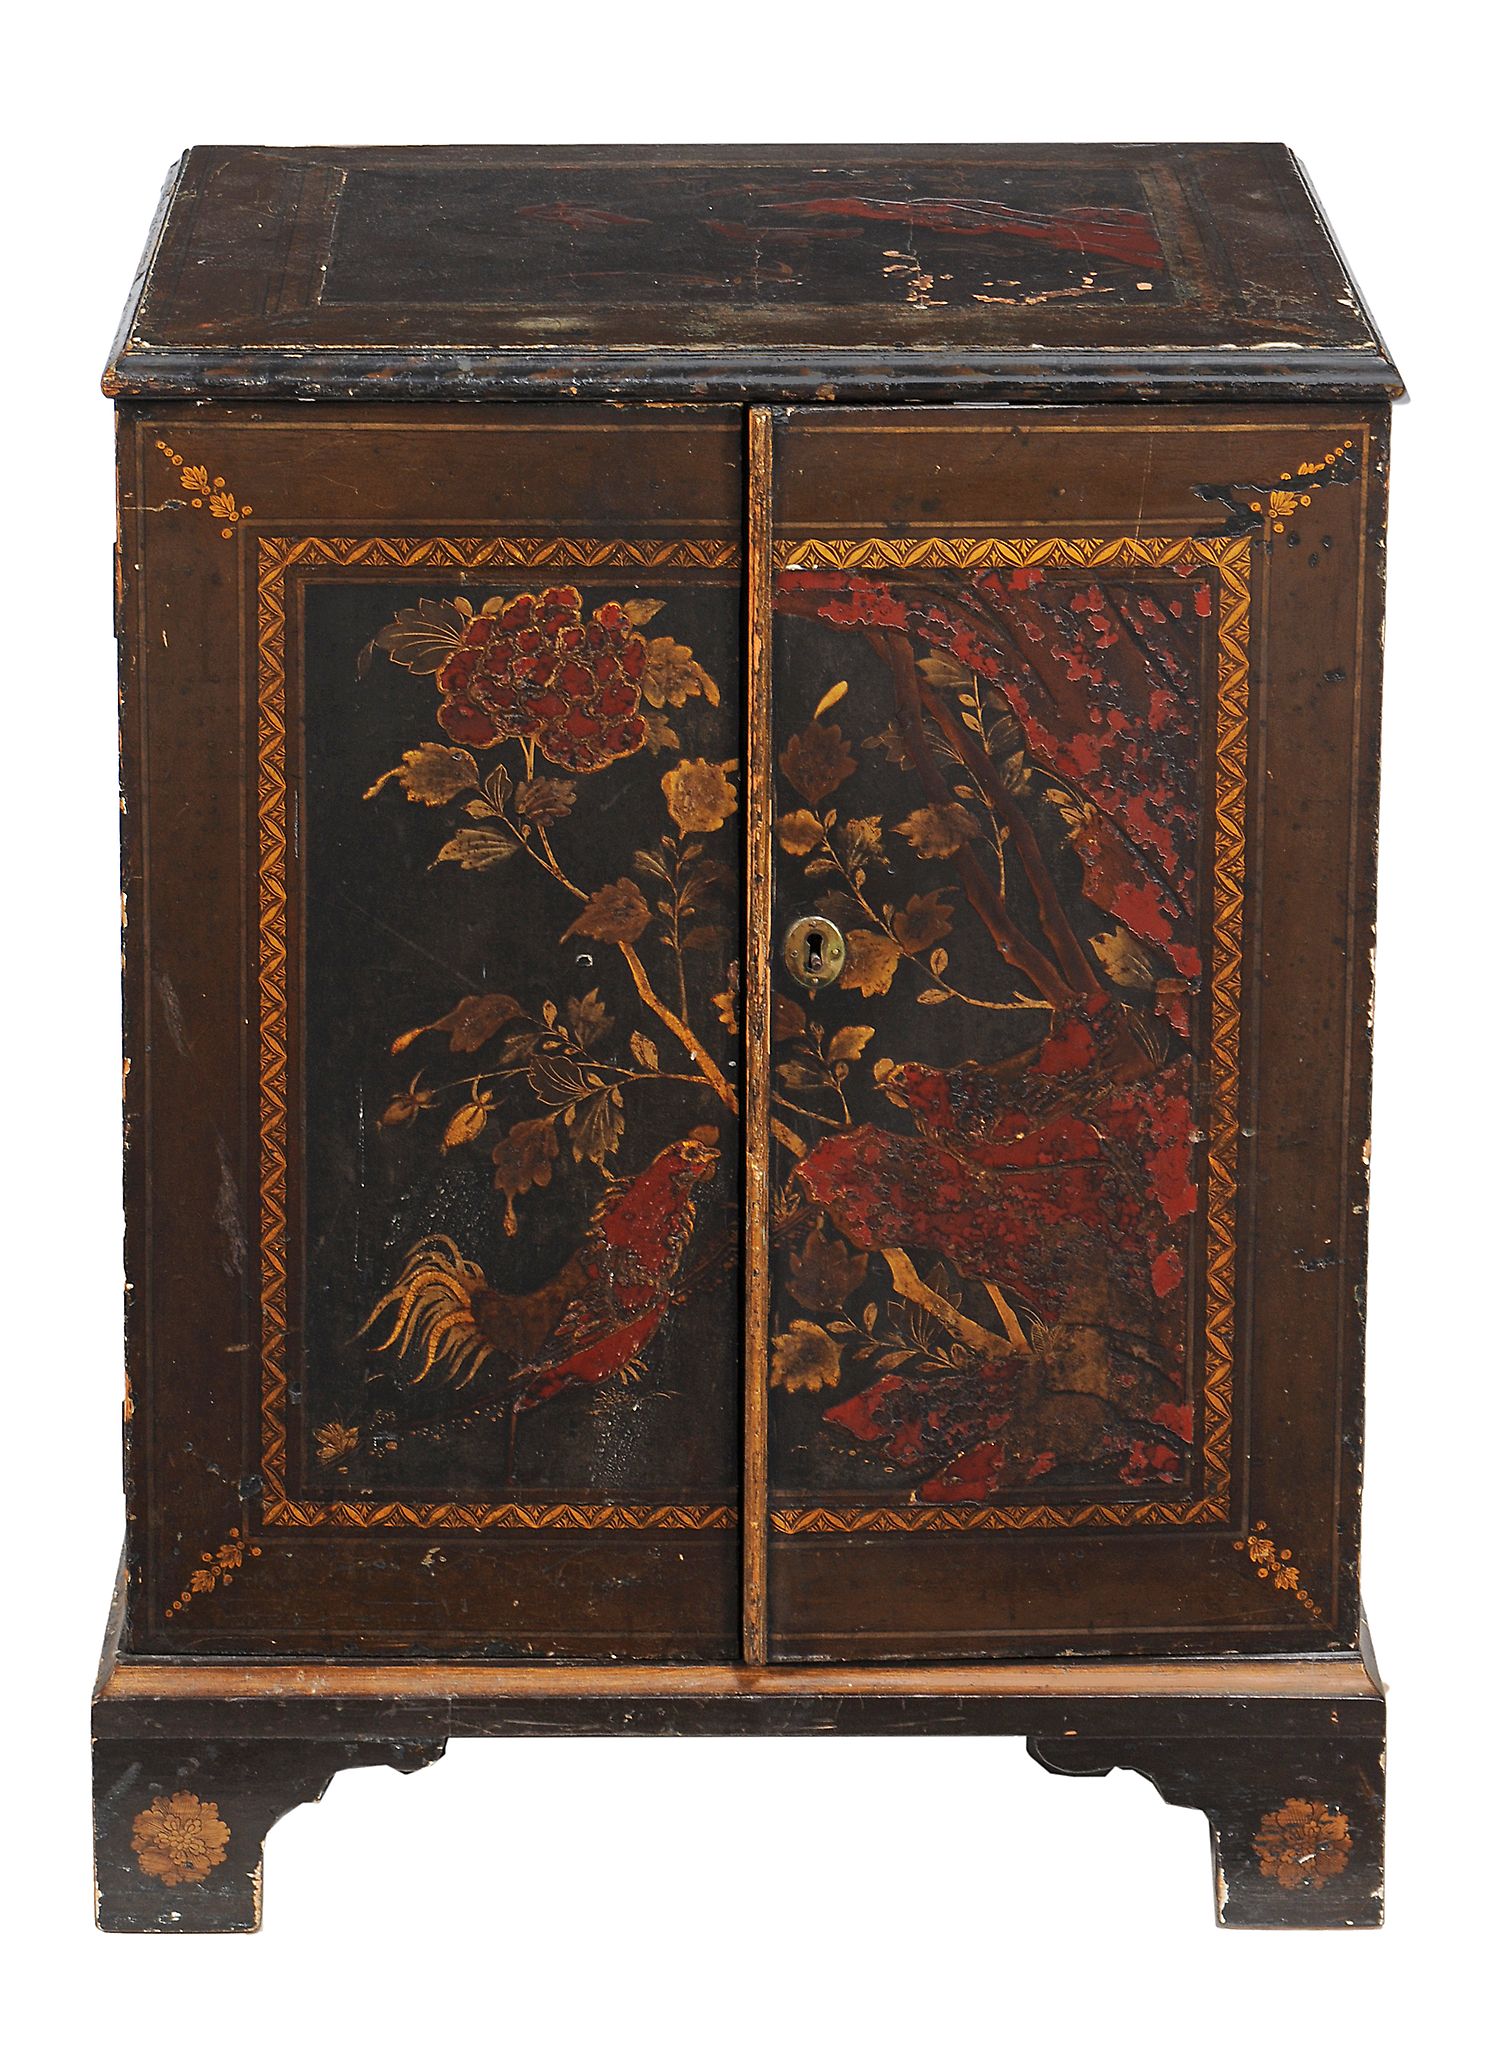 A black lacquer and gilt decorated cupboard  , late 18th/ early 19th century,  with gilt and